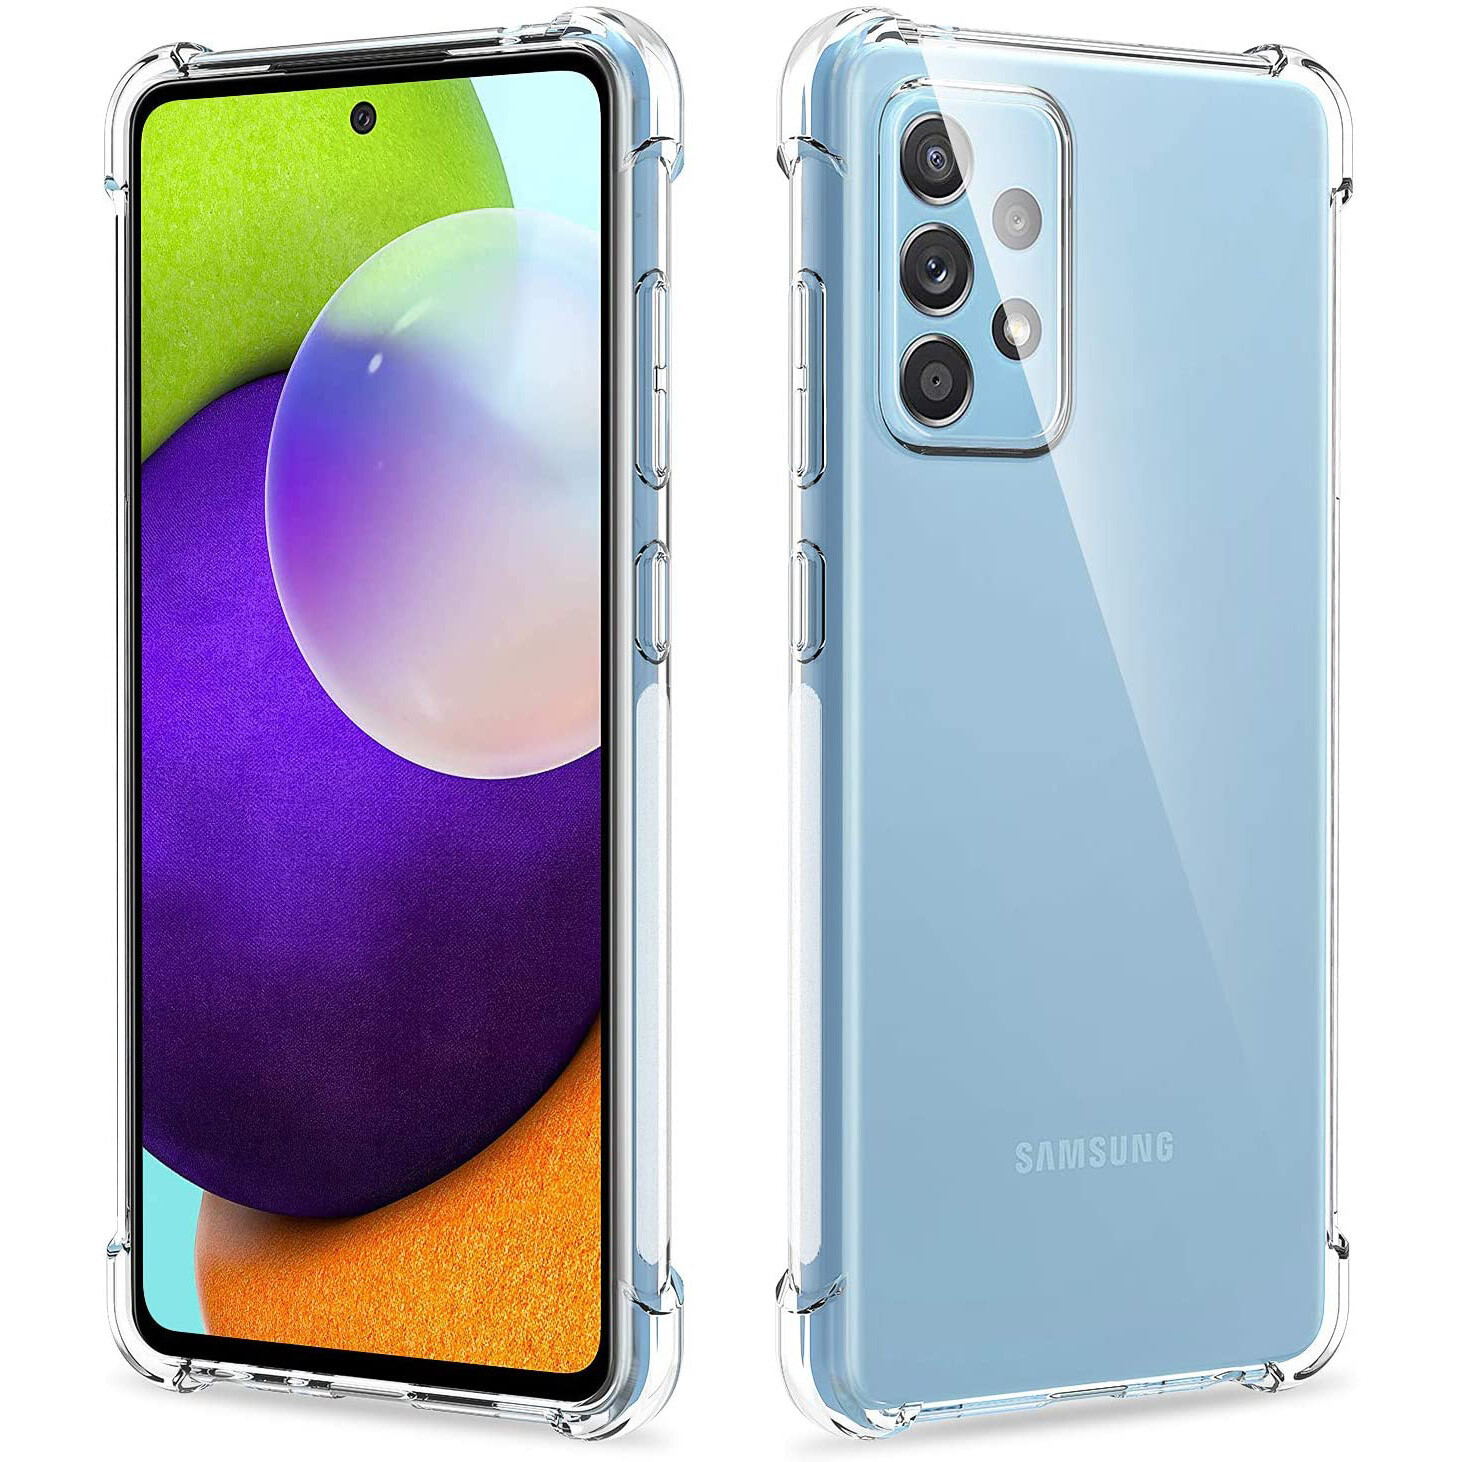 Samsung Galaxy A52 Premium Antiburst Clear Armor Shockproof Case with 3D Screen Protector Glass